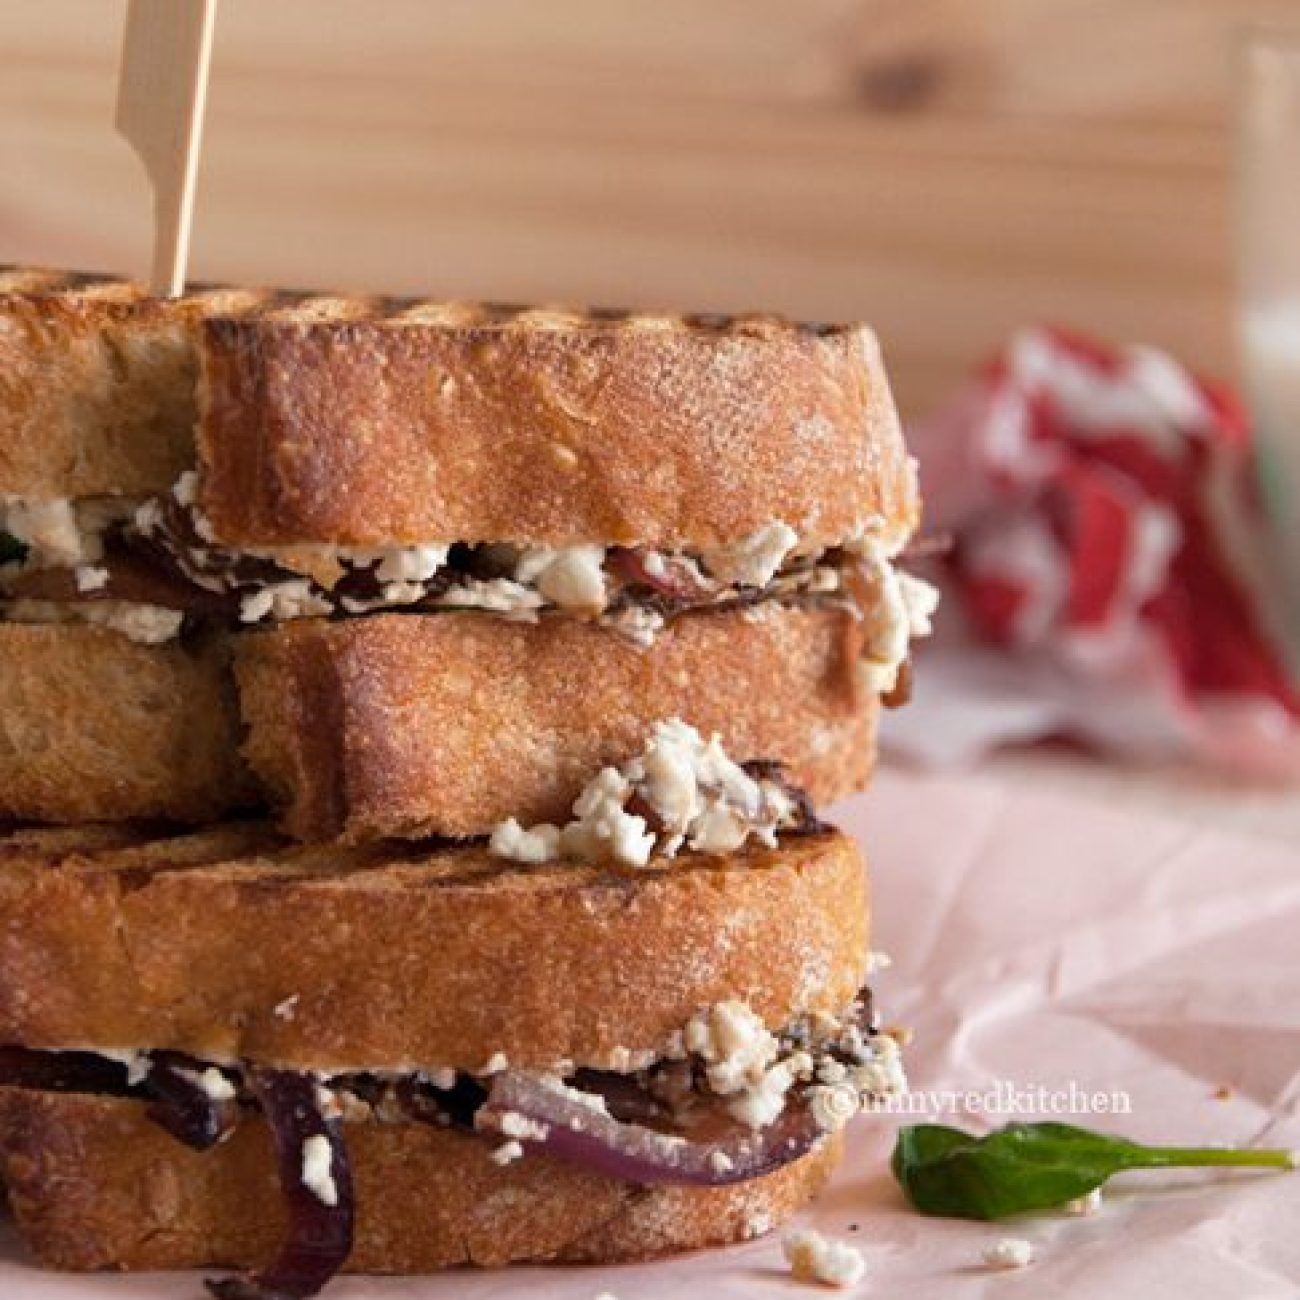 Grilled Goat Cheese Sandwiches With